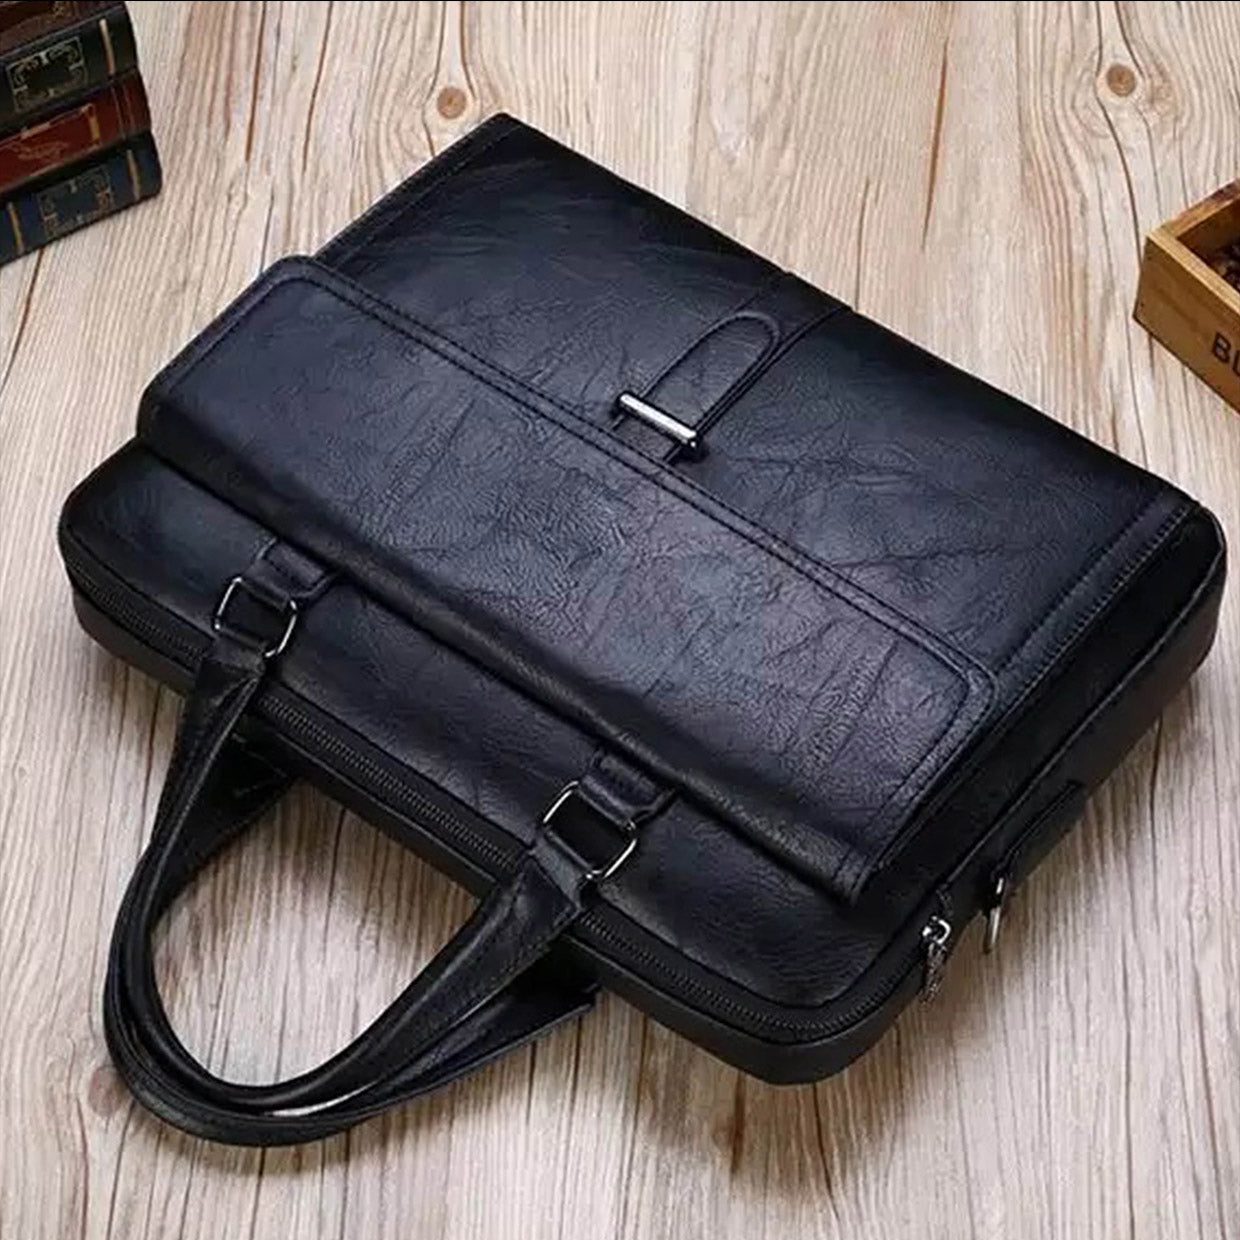 Laptop bag businessbag 'Mac 1' 15 inch grained black leather for men and  women - Corf Bags Leatherbags